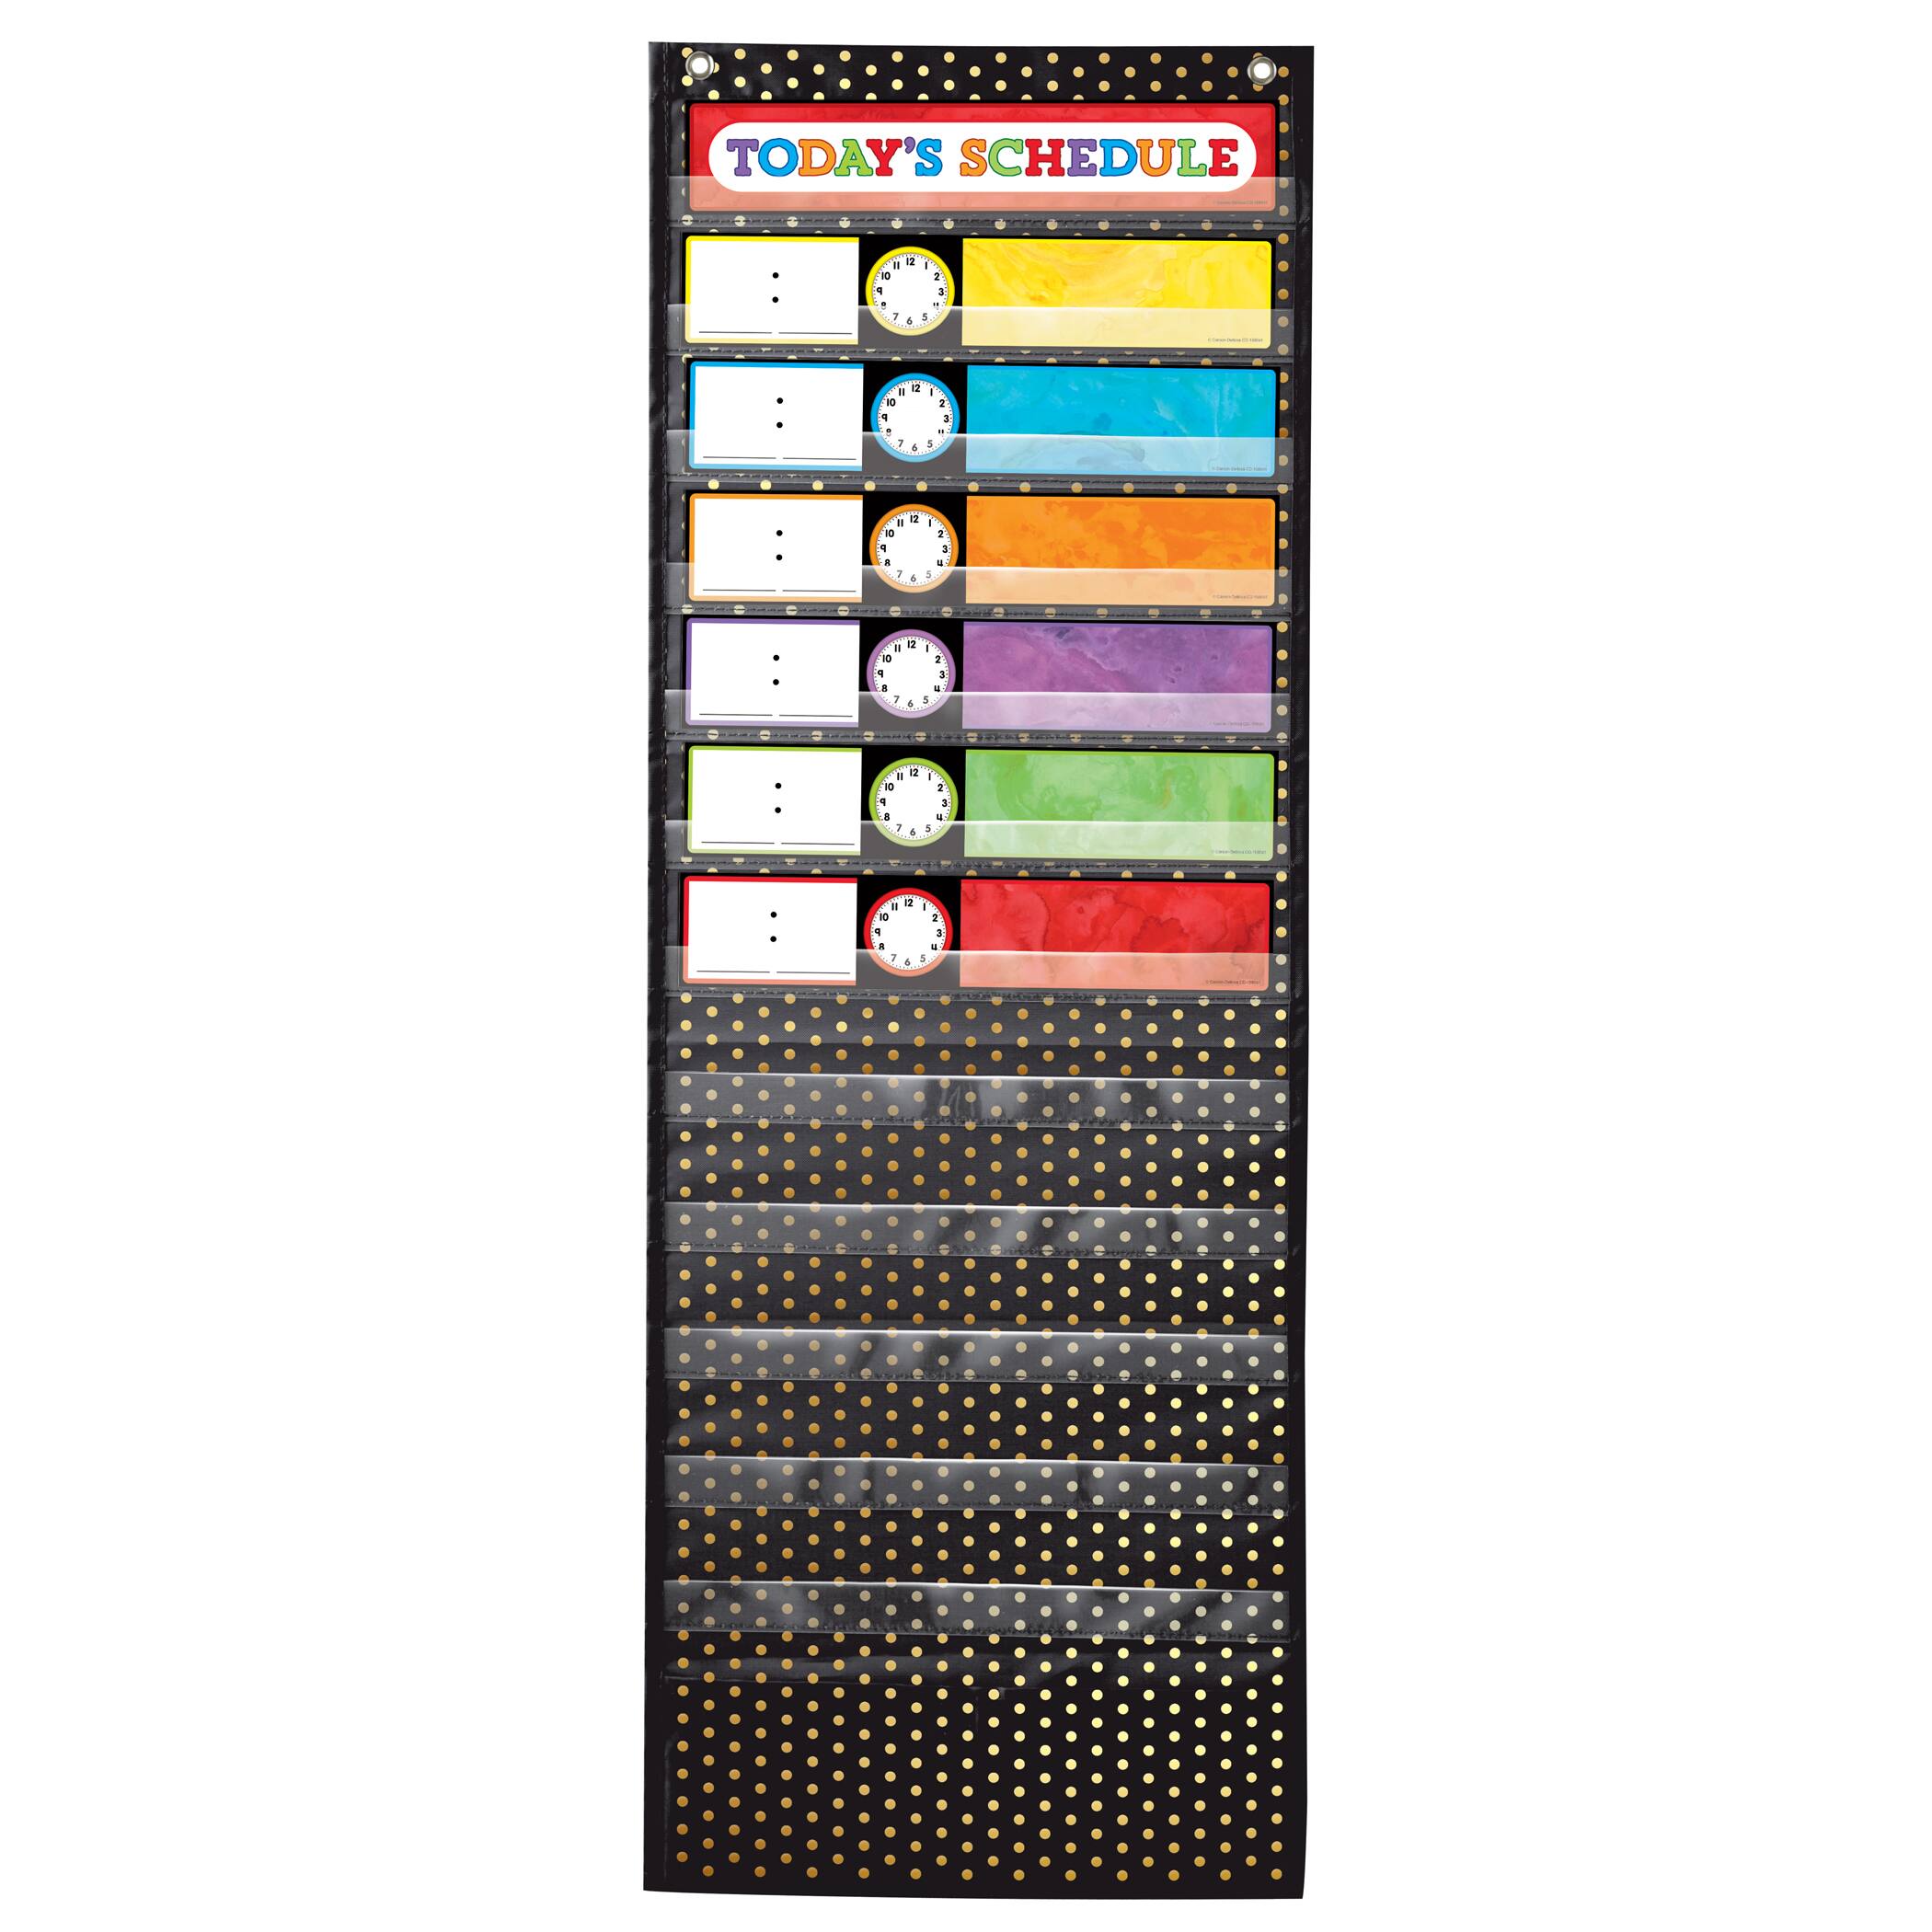 Shop for Deluxe Scheduling: Gold Polka Dot Pocket Chart at Michaels.com